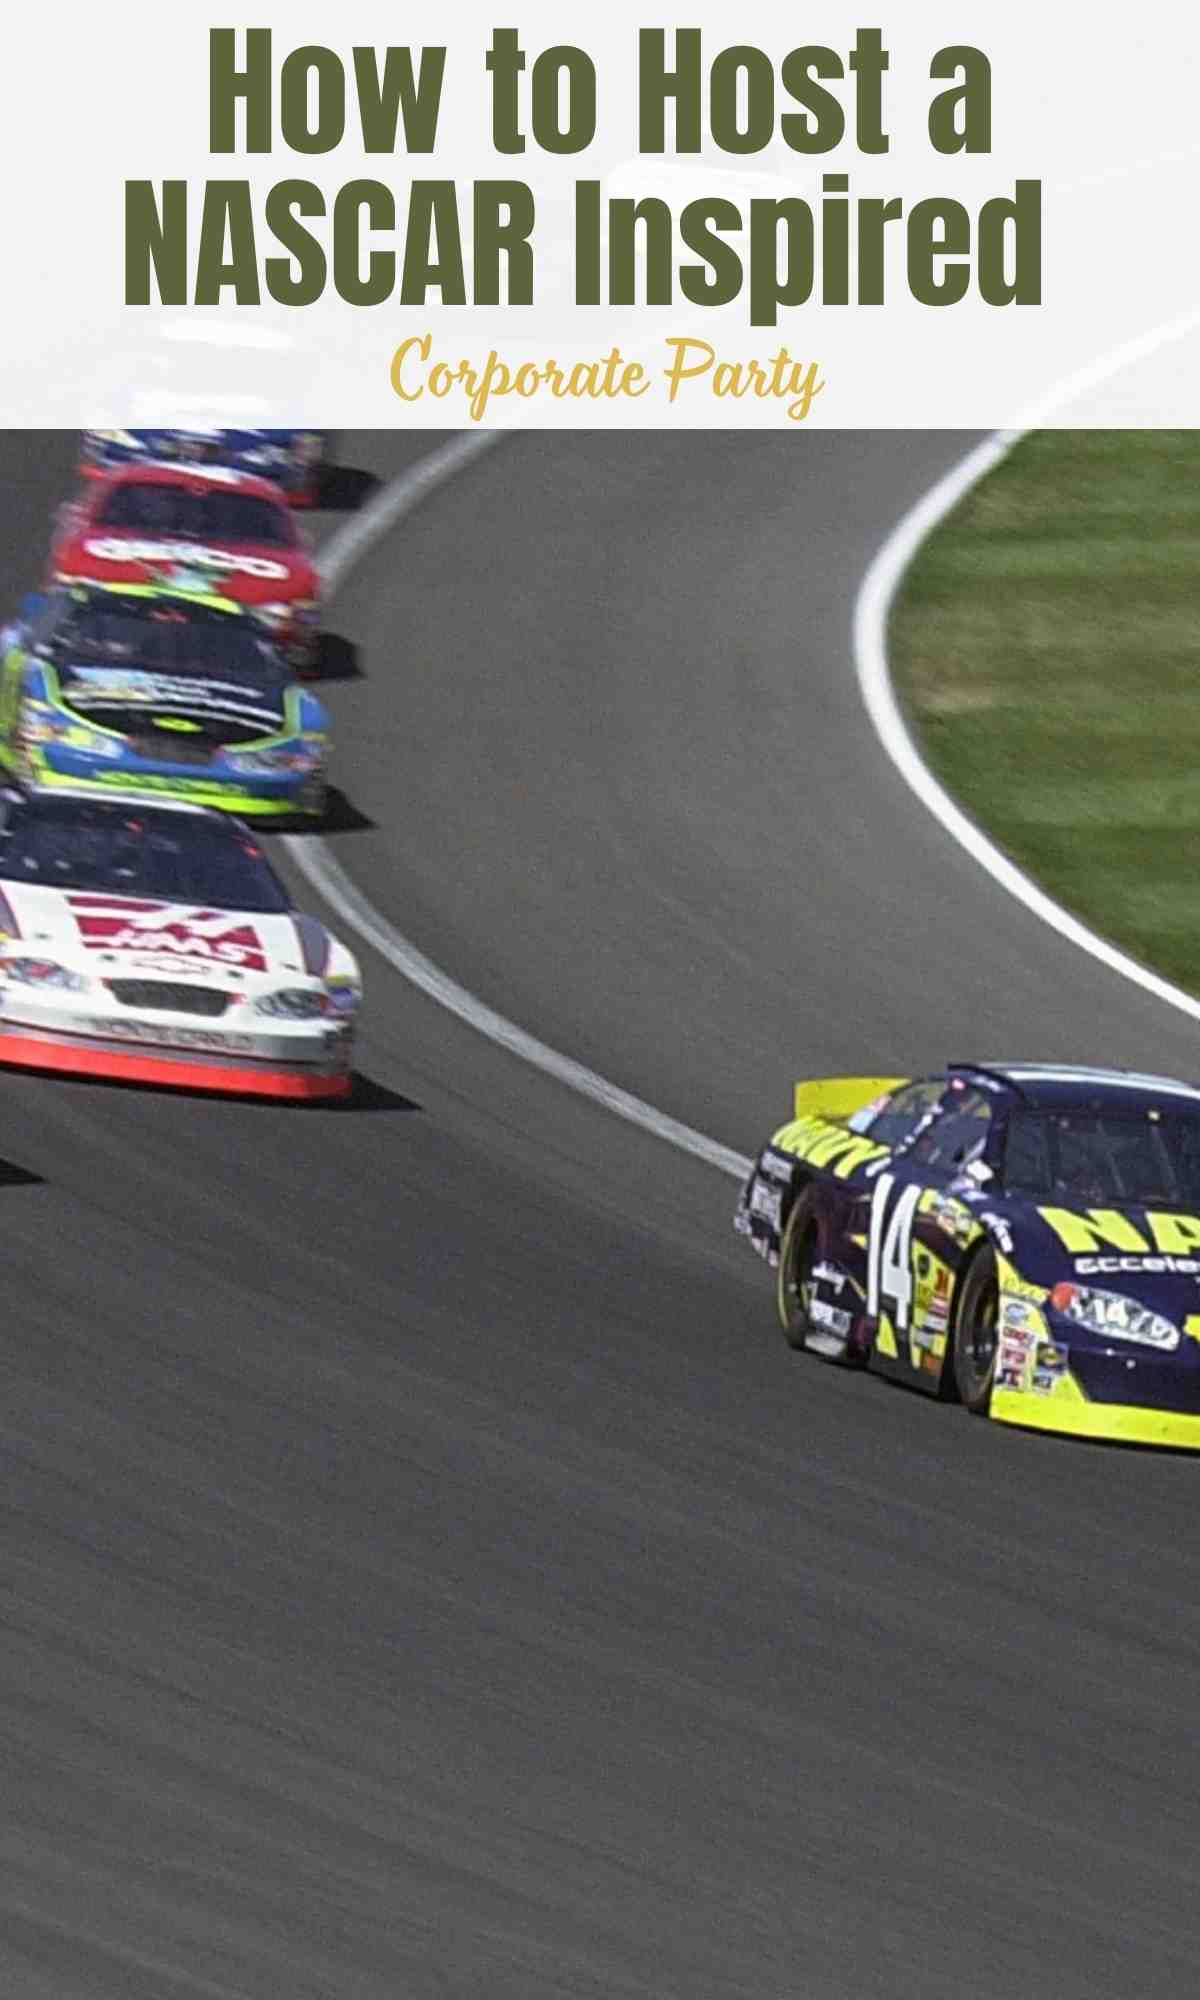 How to Host a NASCAR Inspired Corporate Party